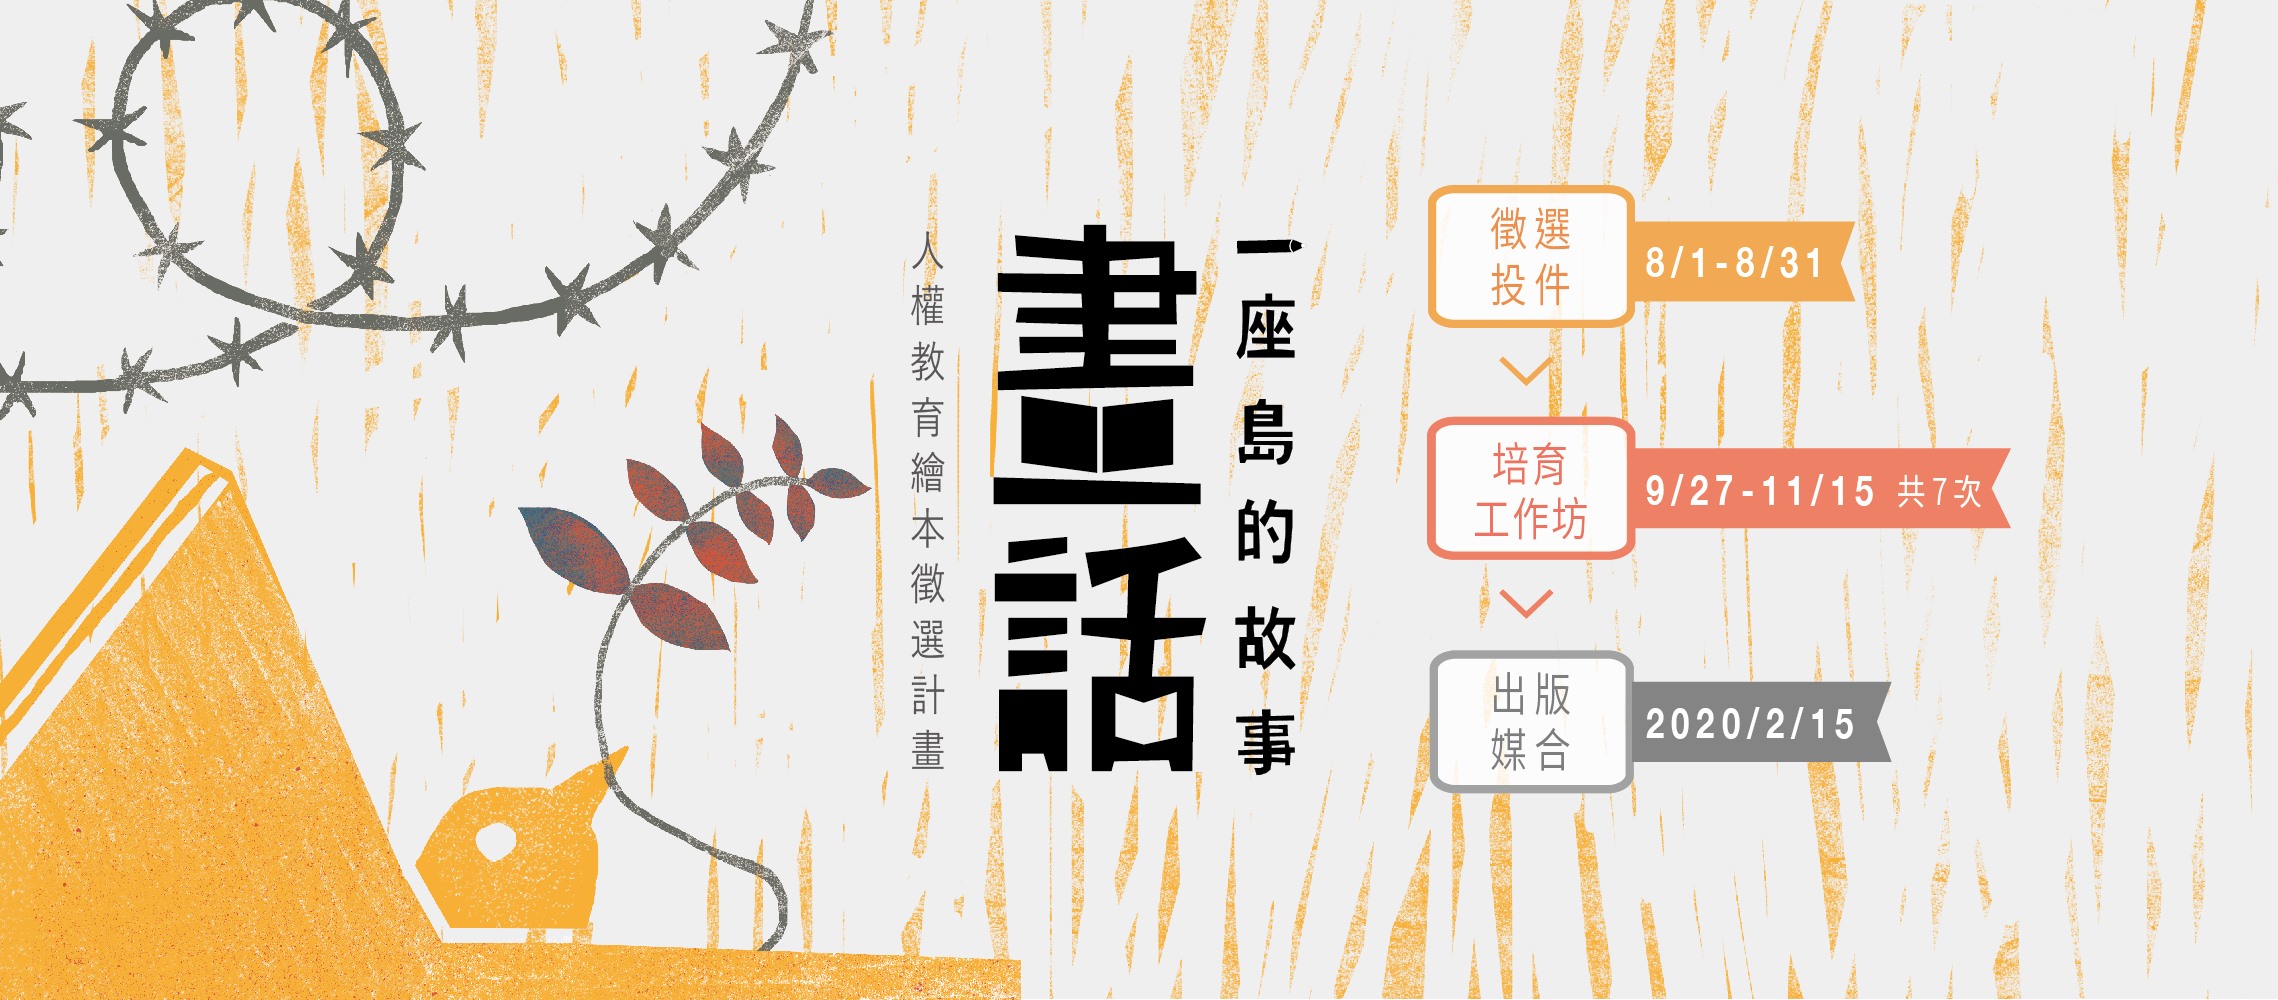 Picture books revisit dark chapters in Taiwan’s human rights history